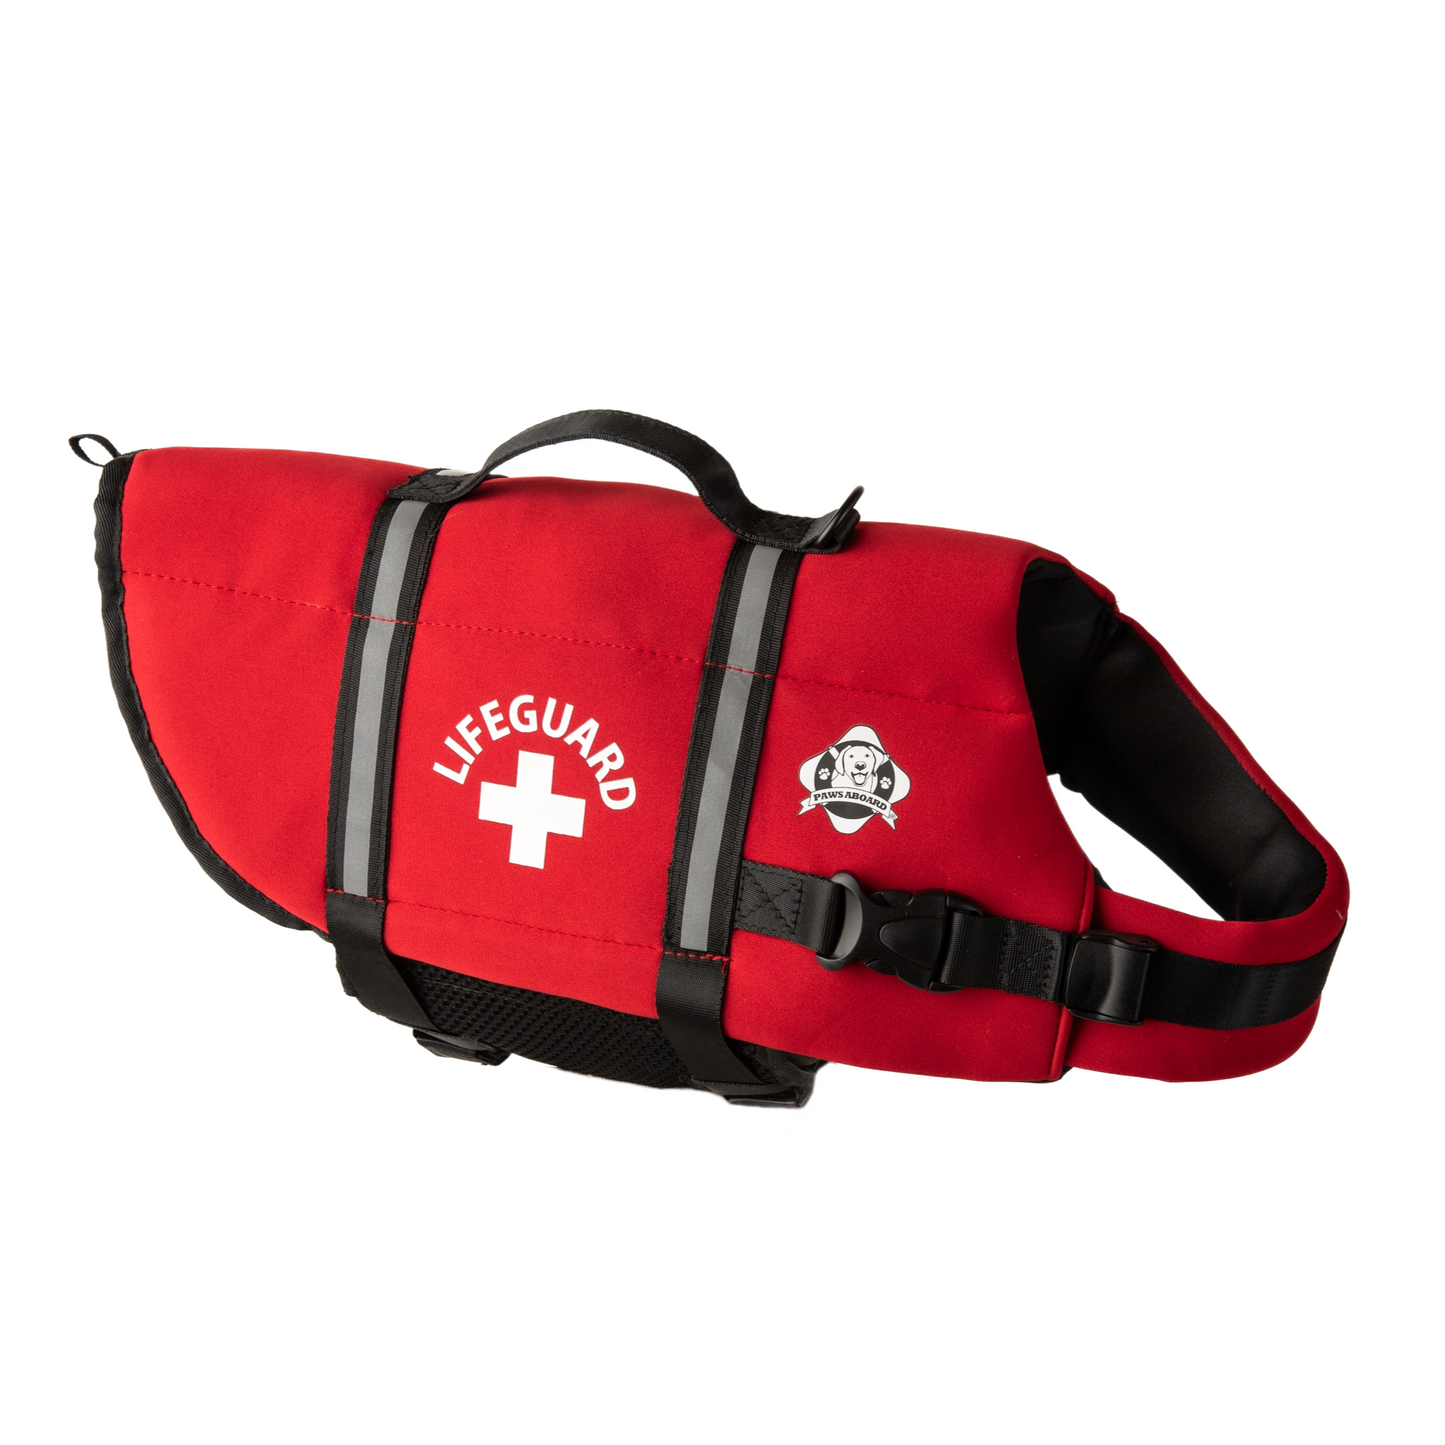 Bright red dog life jacket with Life Guard in print with life guard cross centered between reflective straps, top rescue handle. Paws Aboard logo is also on side of neoprene jacket.